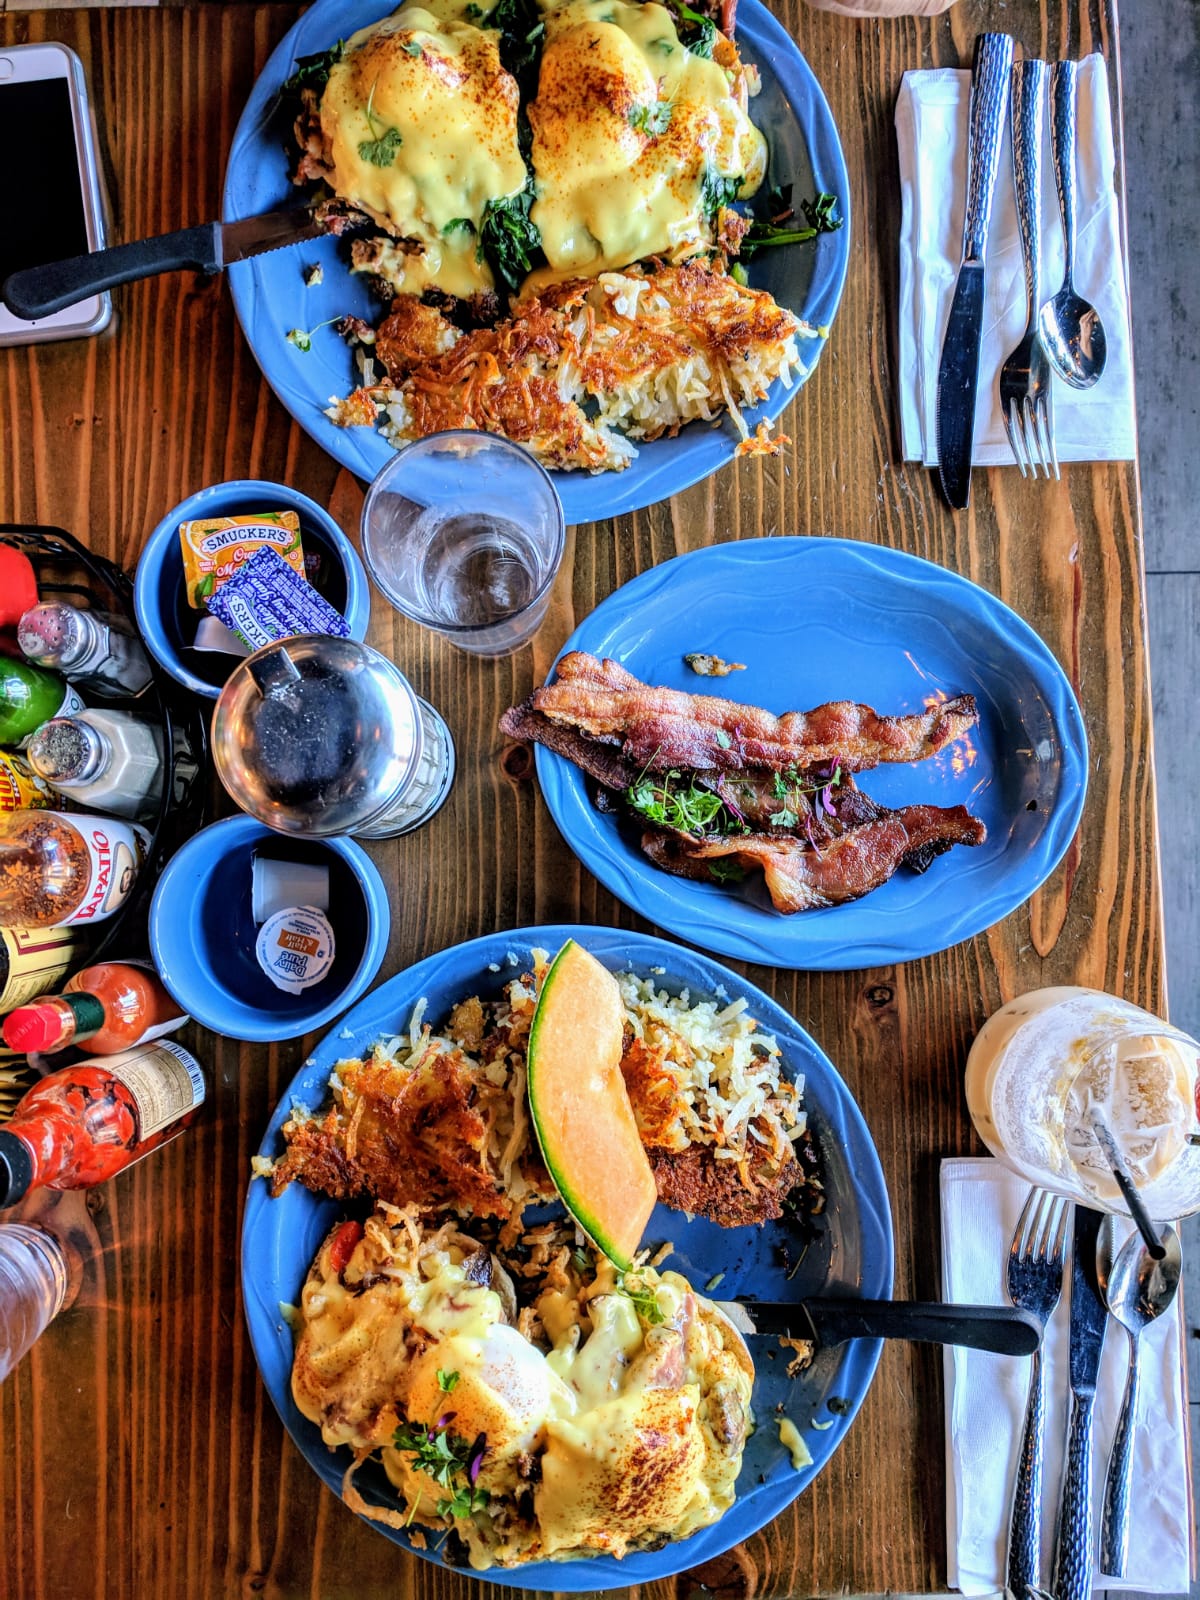 4 Most Instagrammable Brunch Places in San Jose, CA